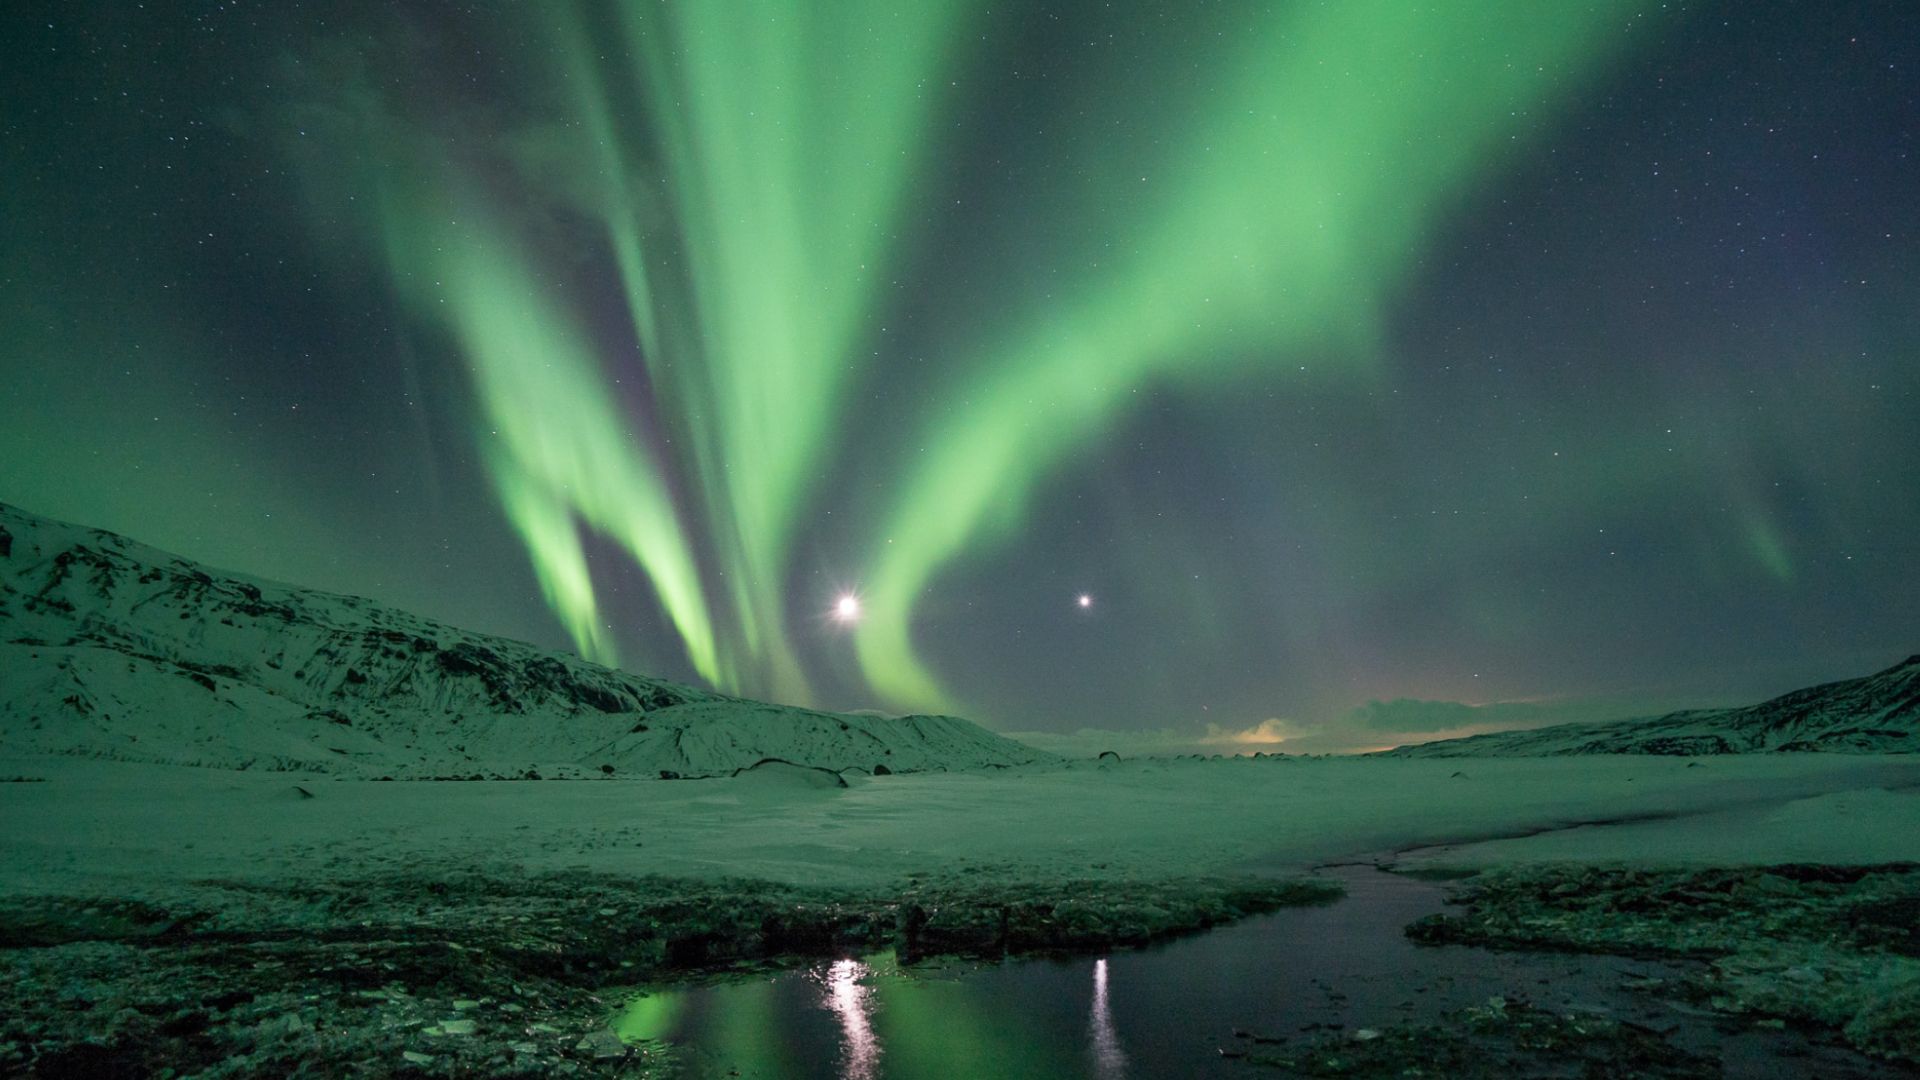 The Northern Lights in Iceland during winter with snow